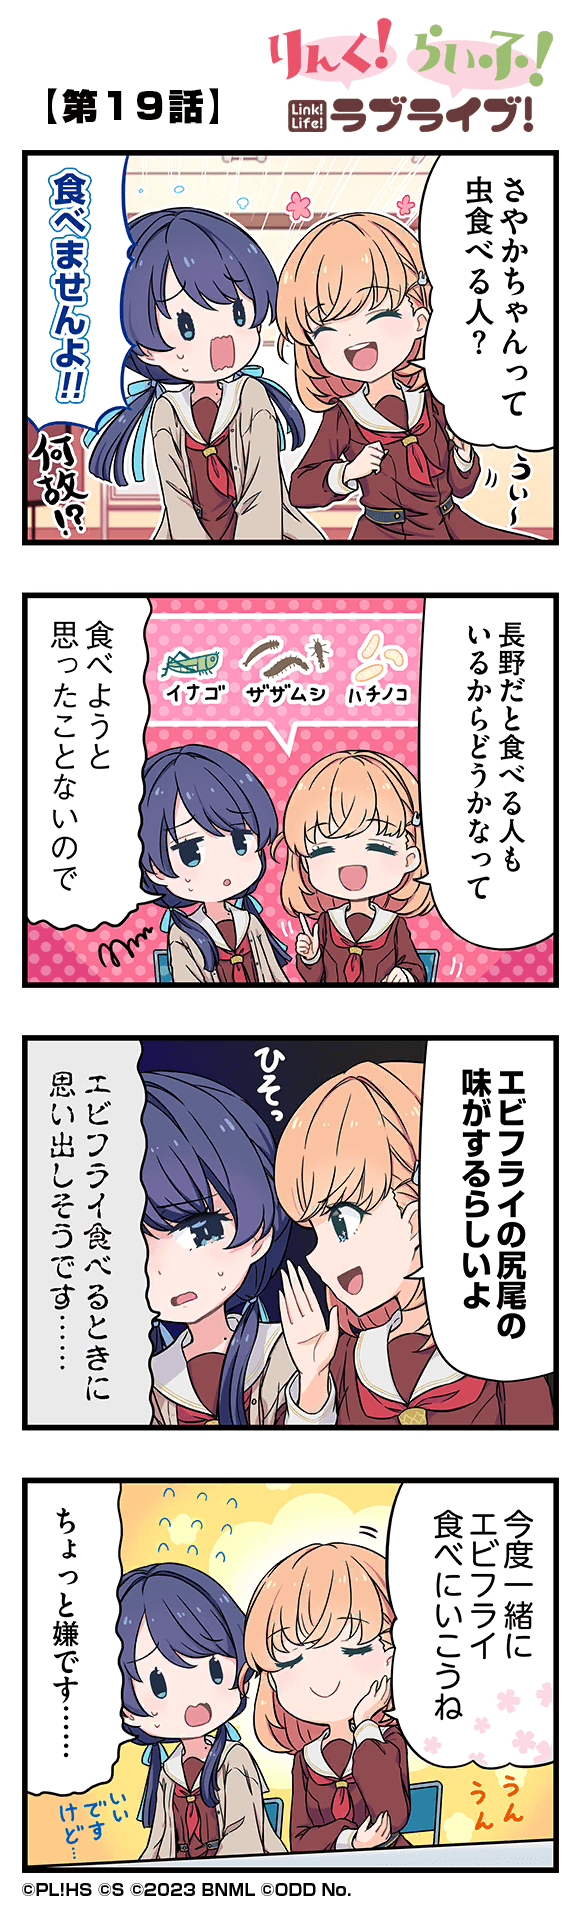 Link! Life! Love Live!「Chapter 19」